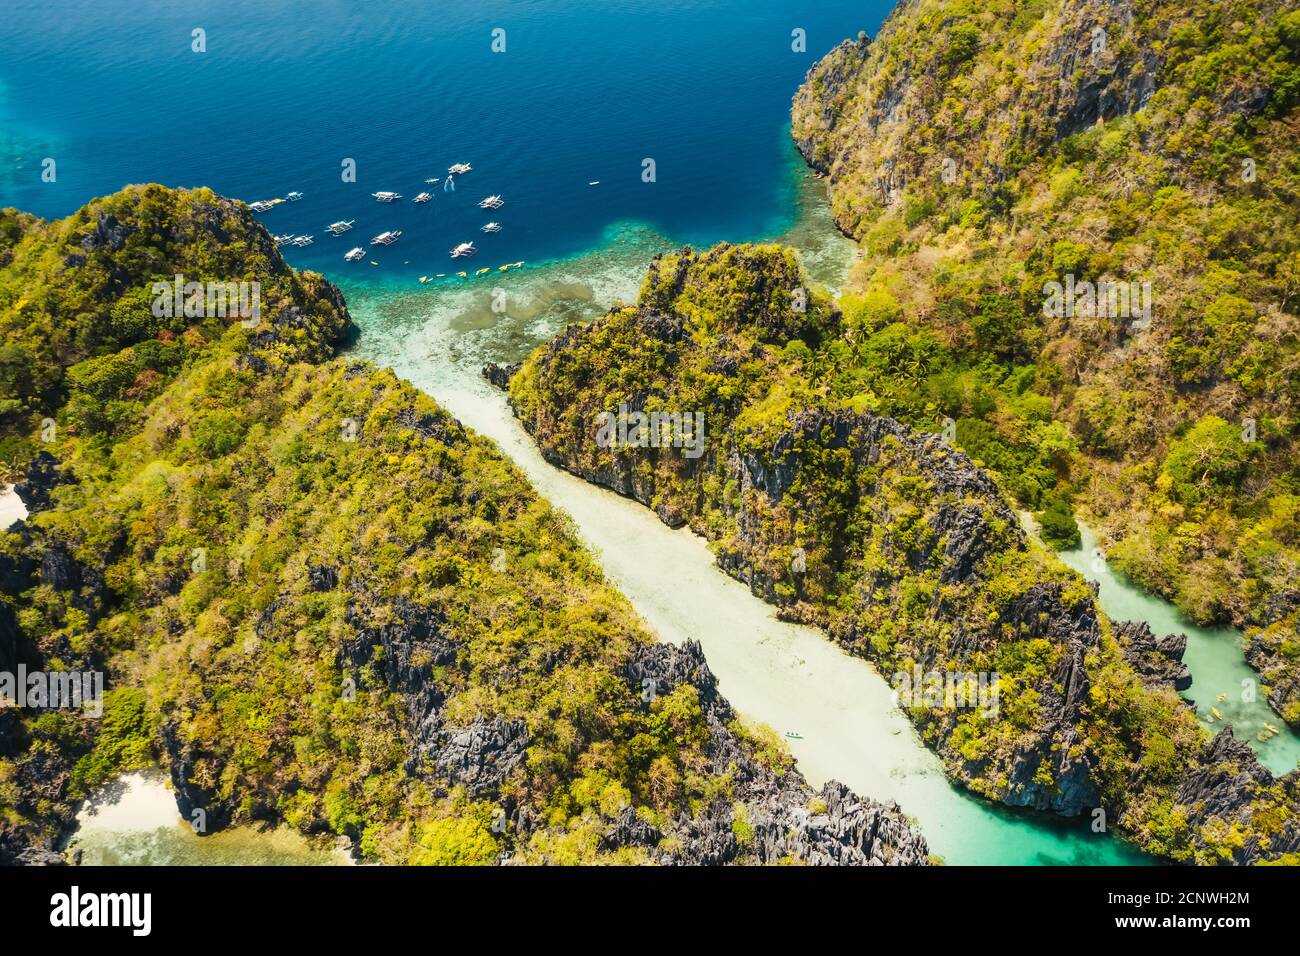 Palawan, Philippines aerial view of tropical Miniloc island. Tourism trip boats moored at entrance to big lagoon. Stock Photo